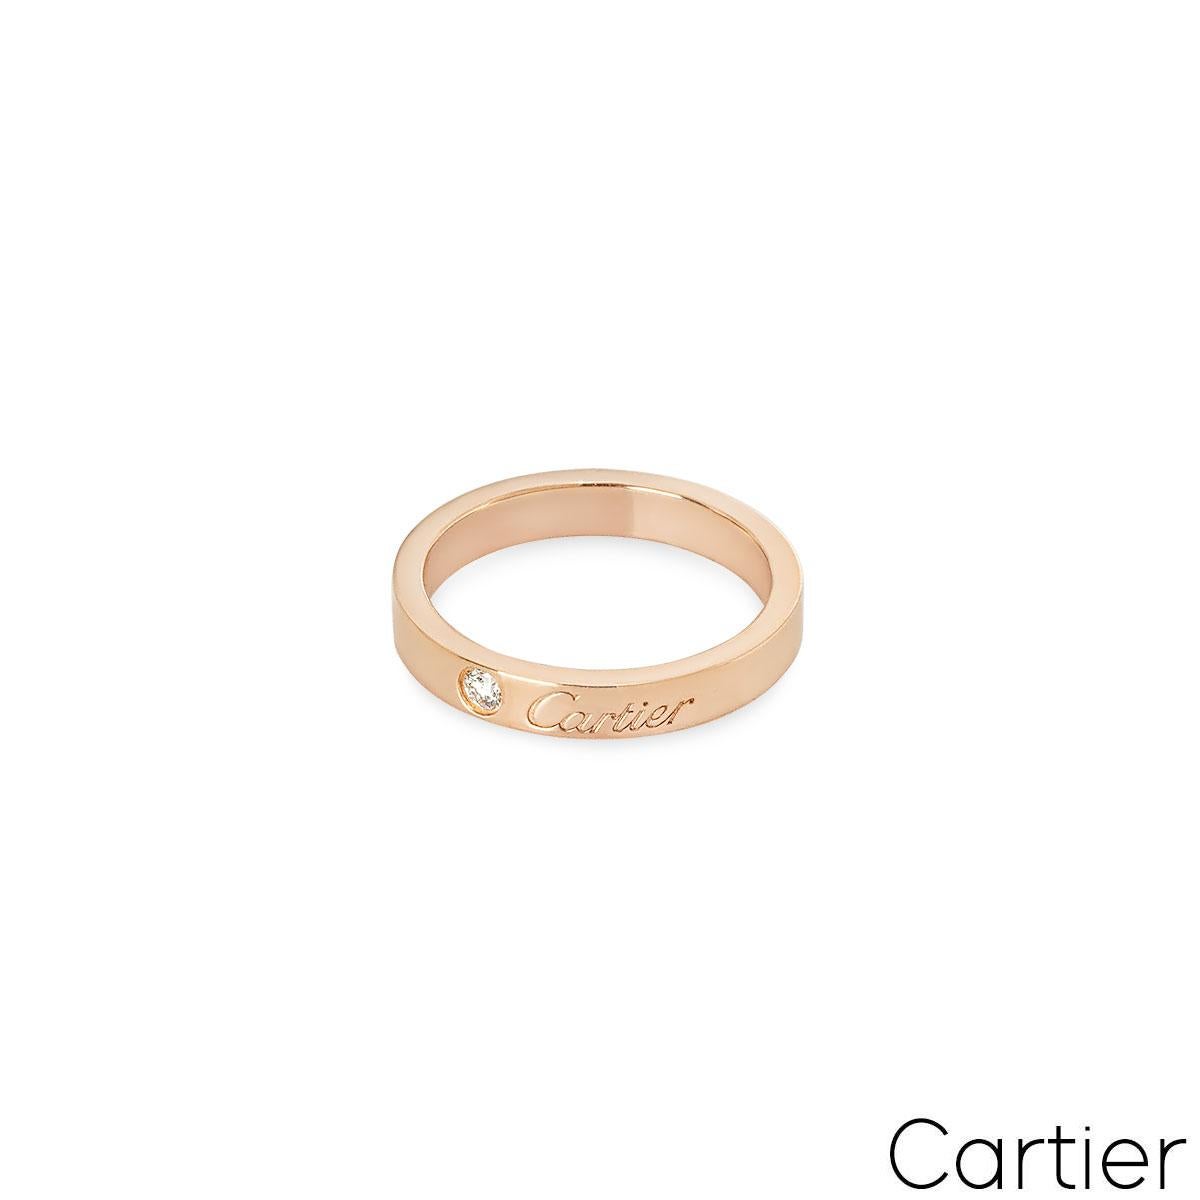 Cartier Rose Gold C de Cartier Diamond Wedding Ring Size 50 B4086400 In Excellent Condition For Sale In London, GB